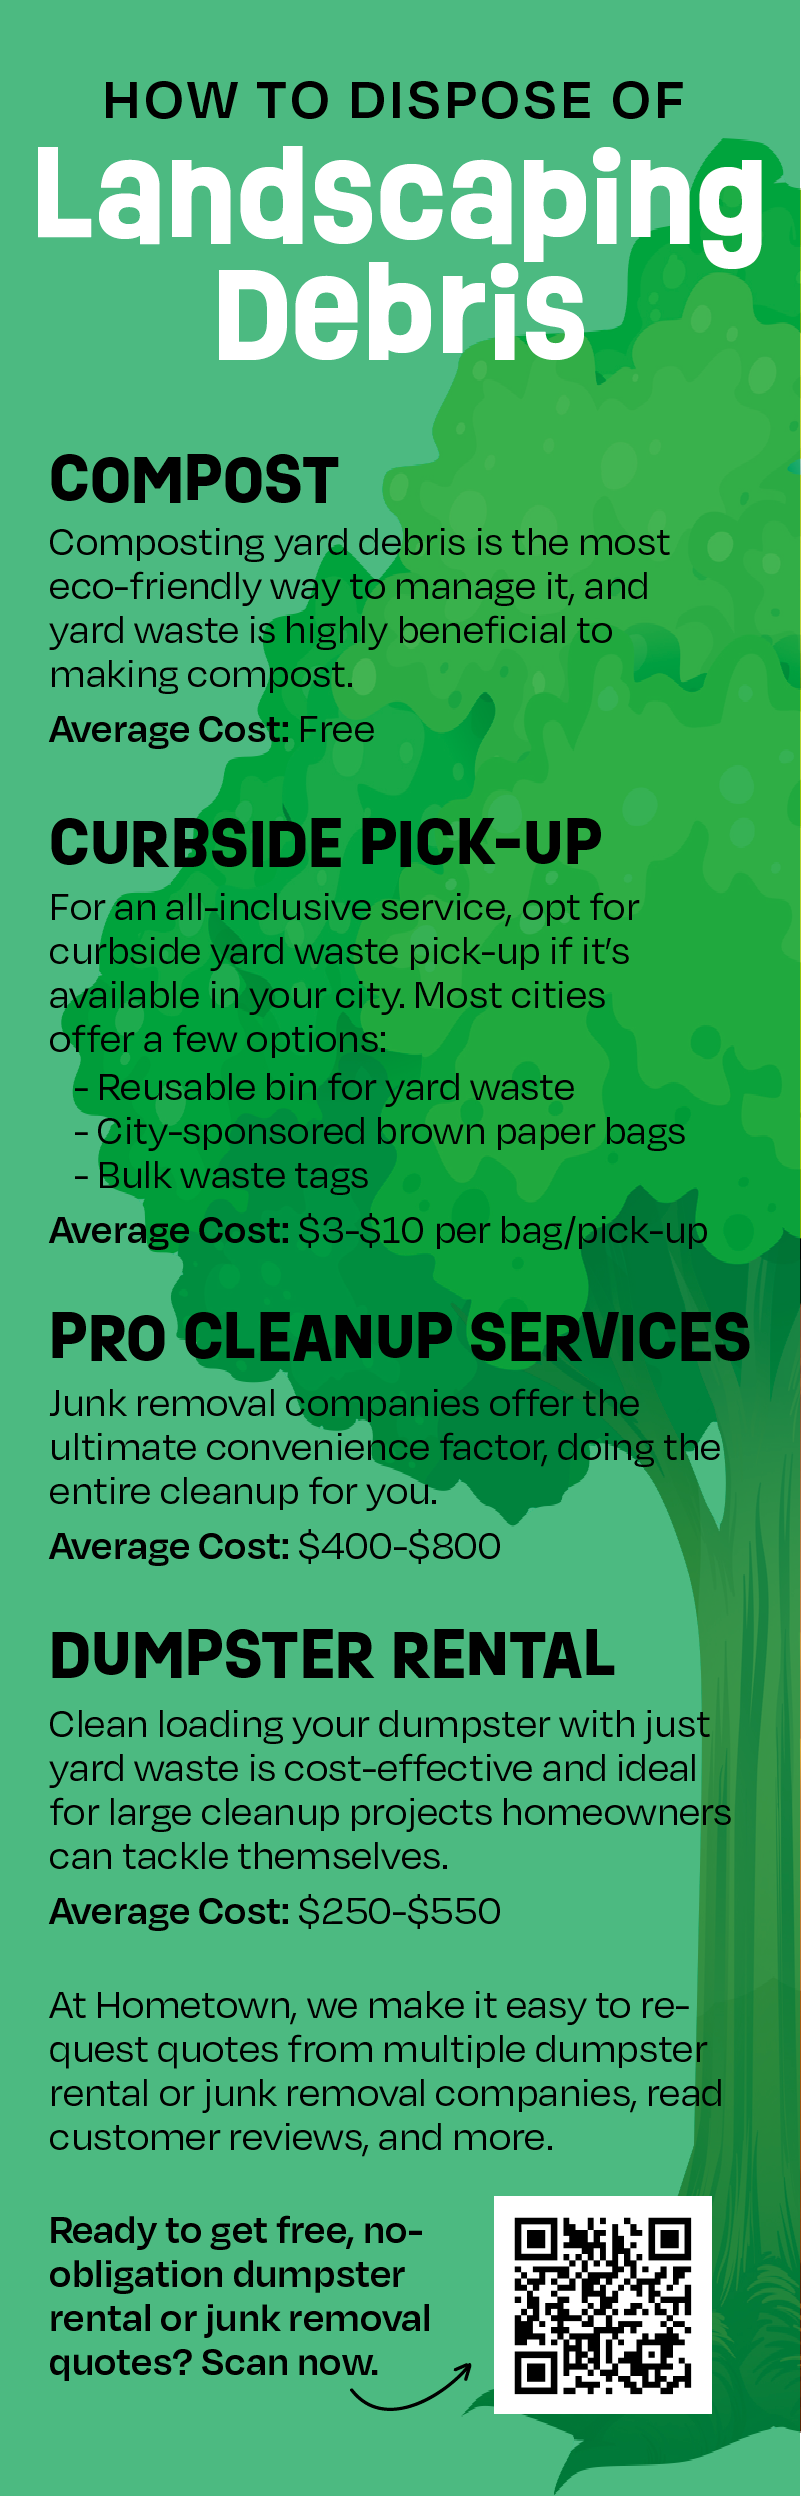 how to dispose of landscaping debris infographic